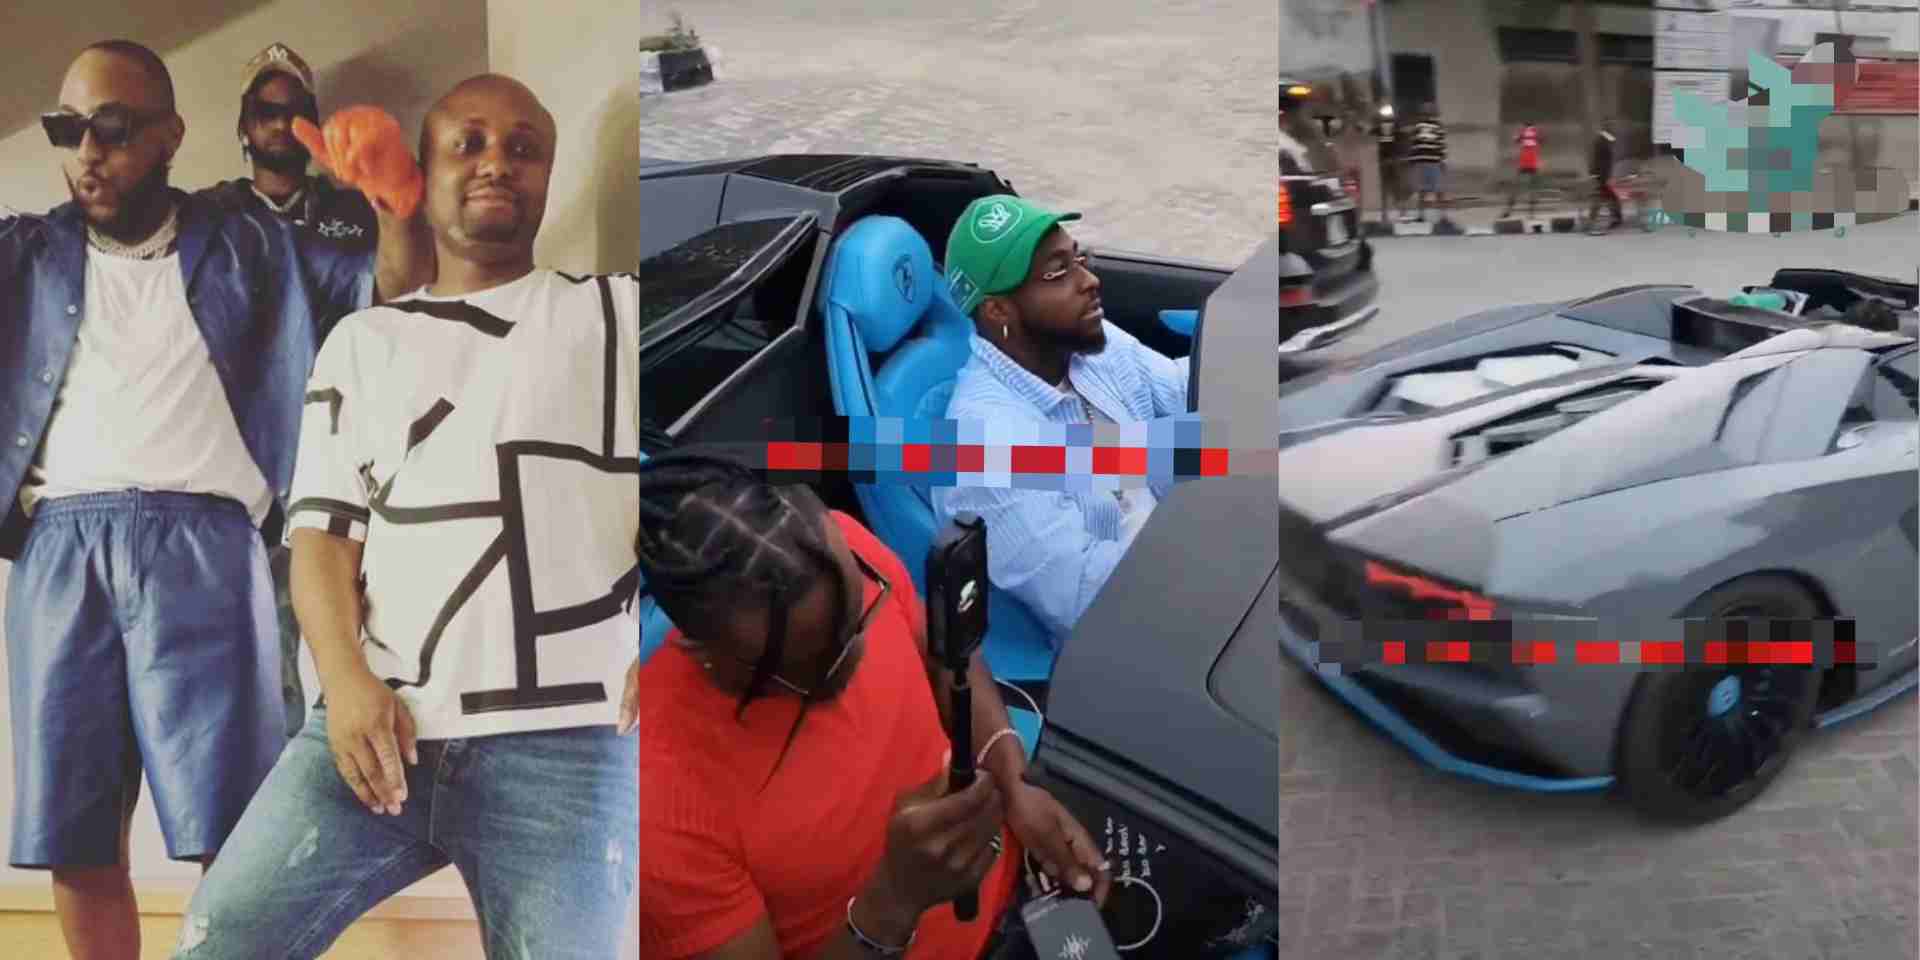 "Motor wey get 12 plugs, make ehm concentrate abeg" - Reactions as Davido shuns Isreal DMW, zooms off in his Lamborghini despite hailing (Video)